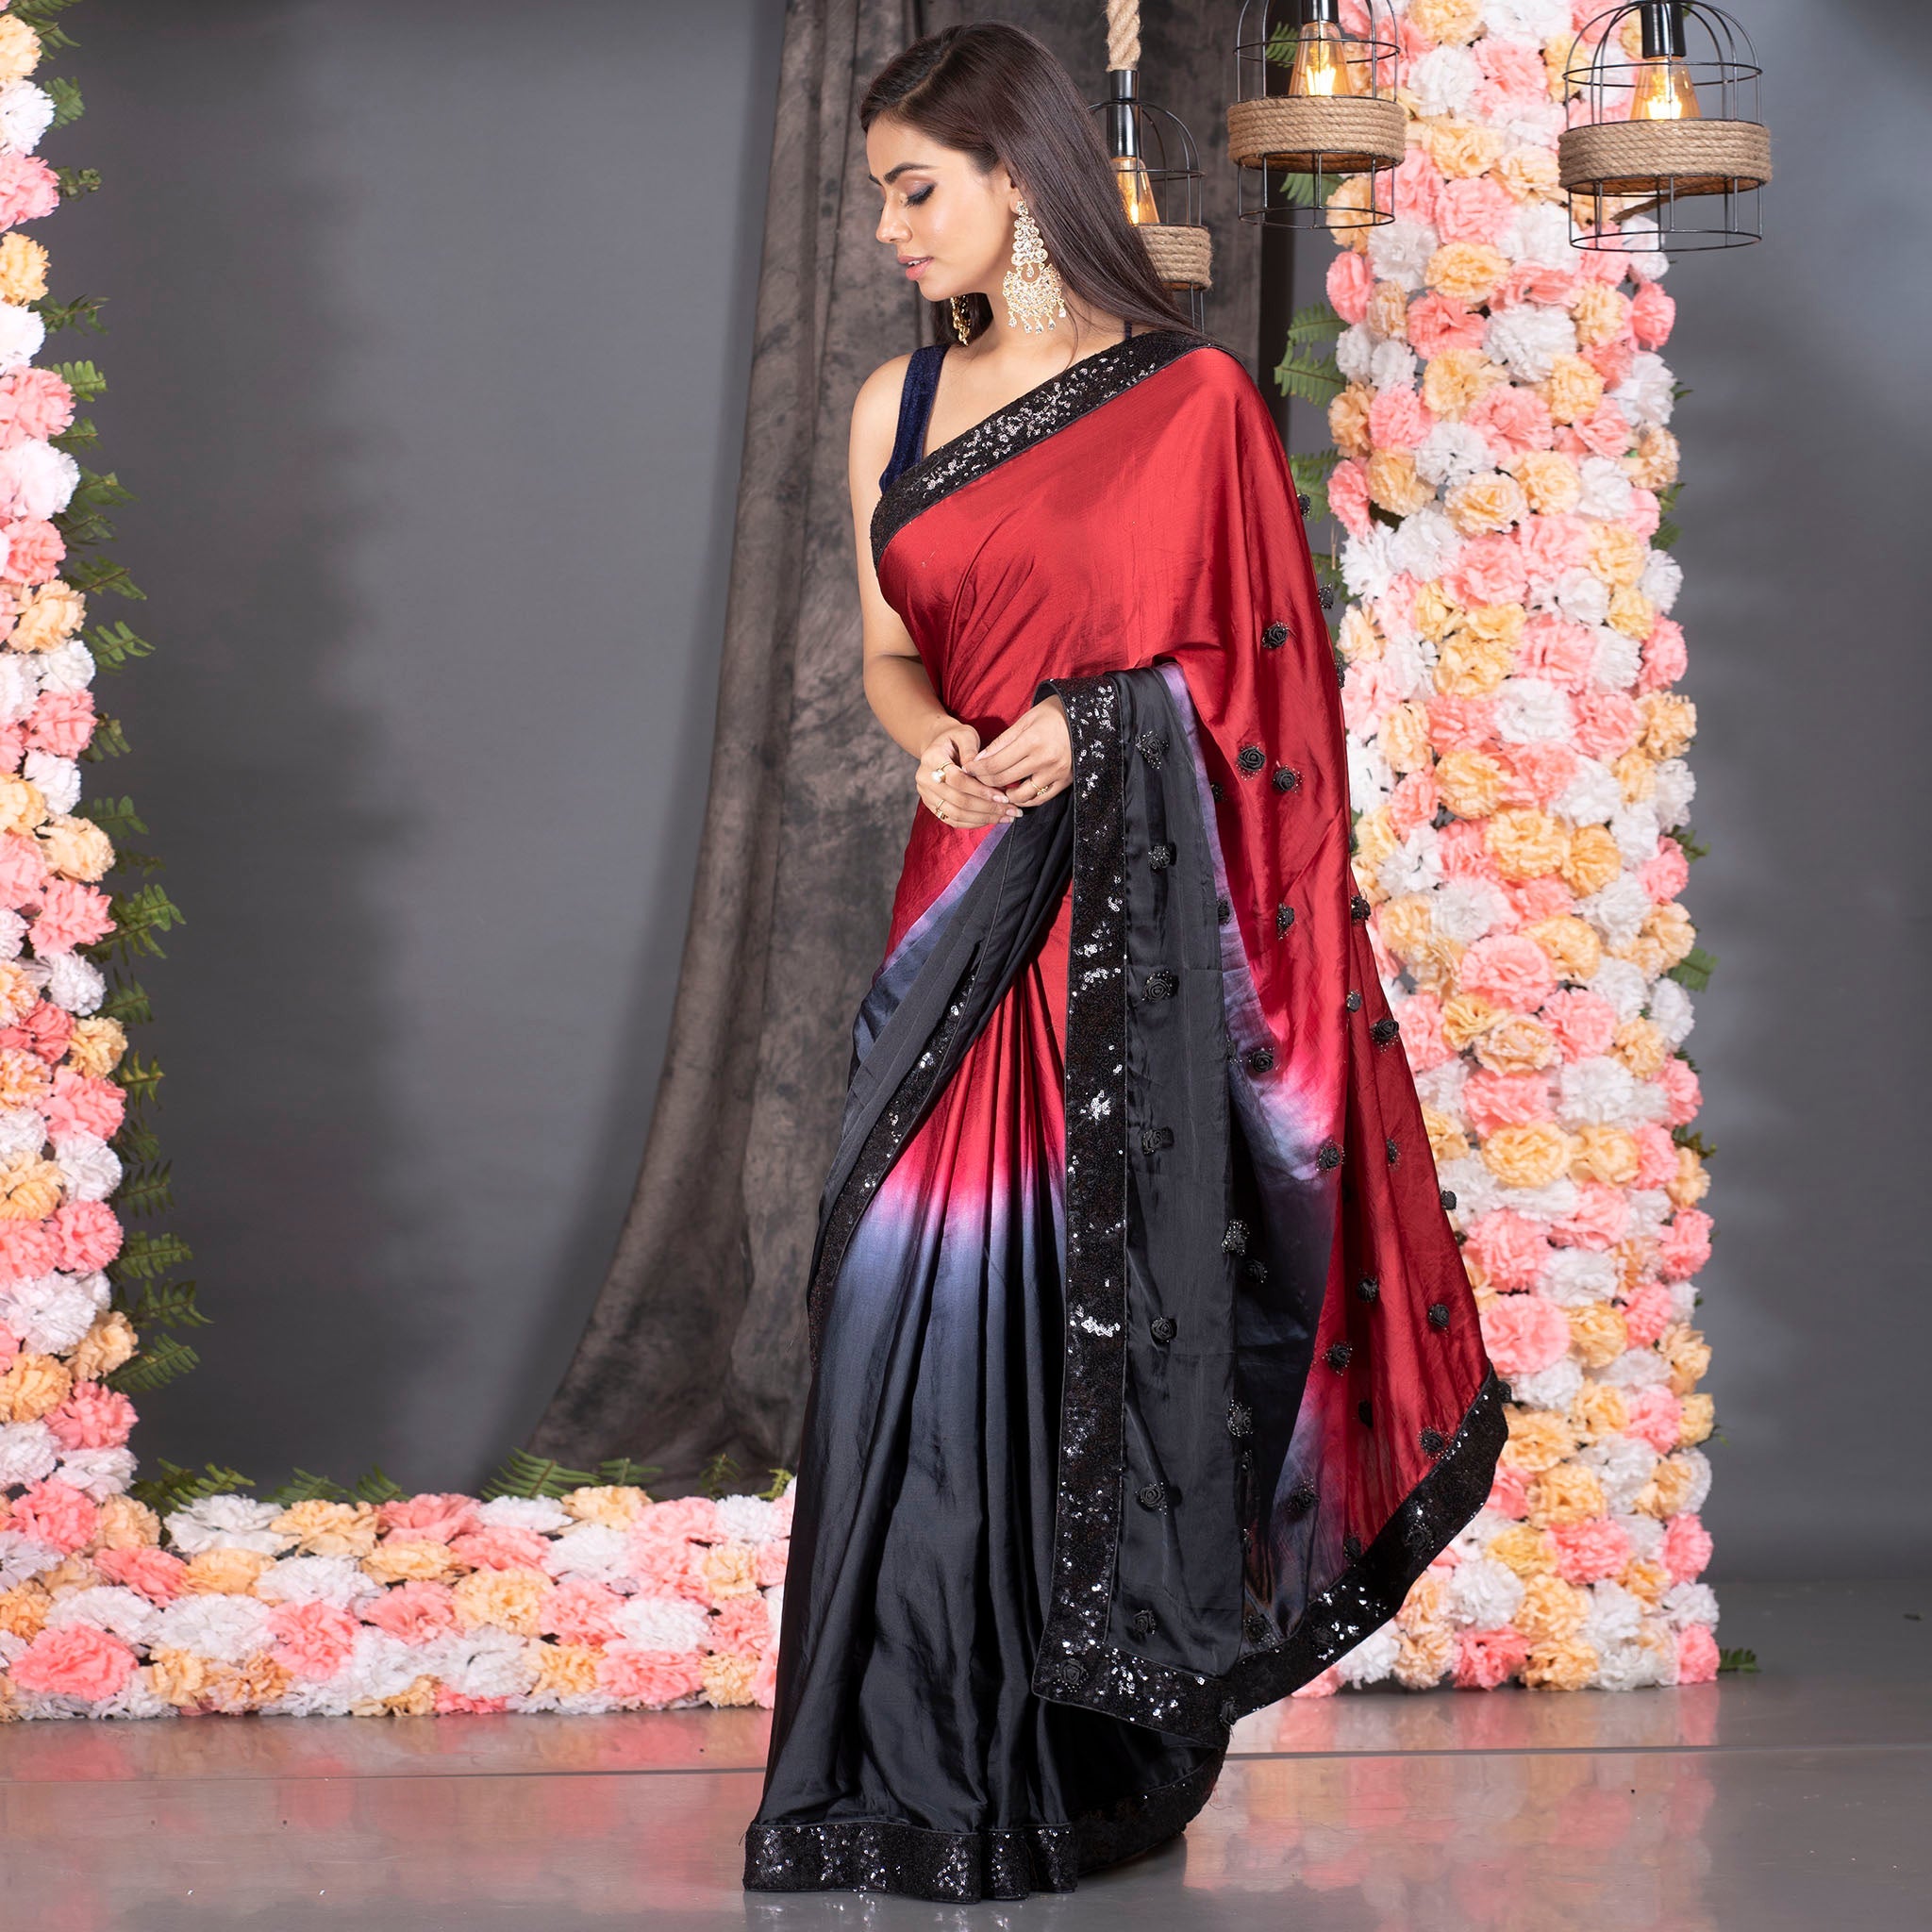 Women's Red And Black Ombre Satin Saree With Sequin Lace Border And Handmade Rosette Pallu - Boveee